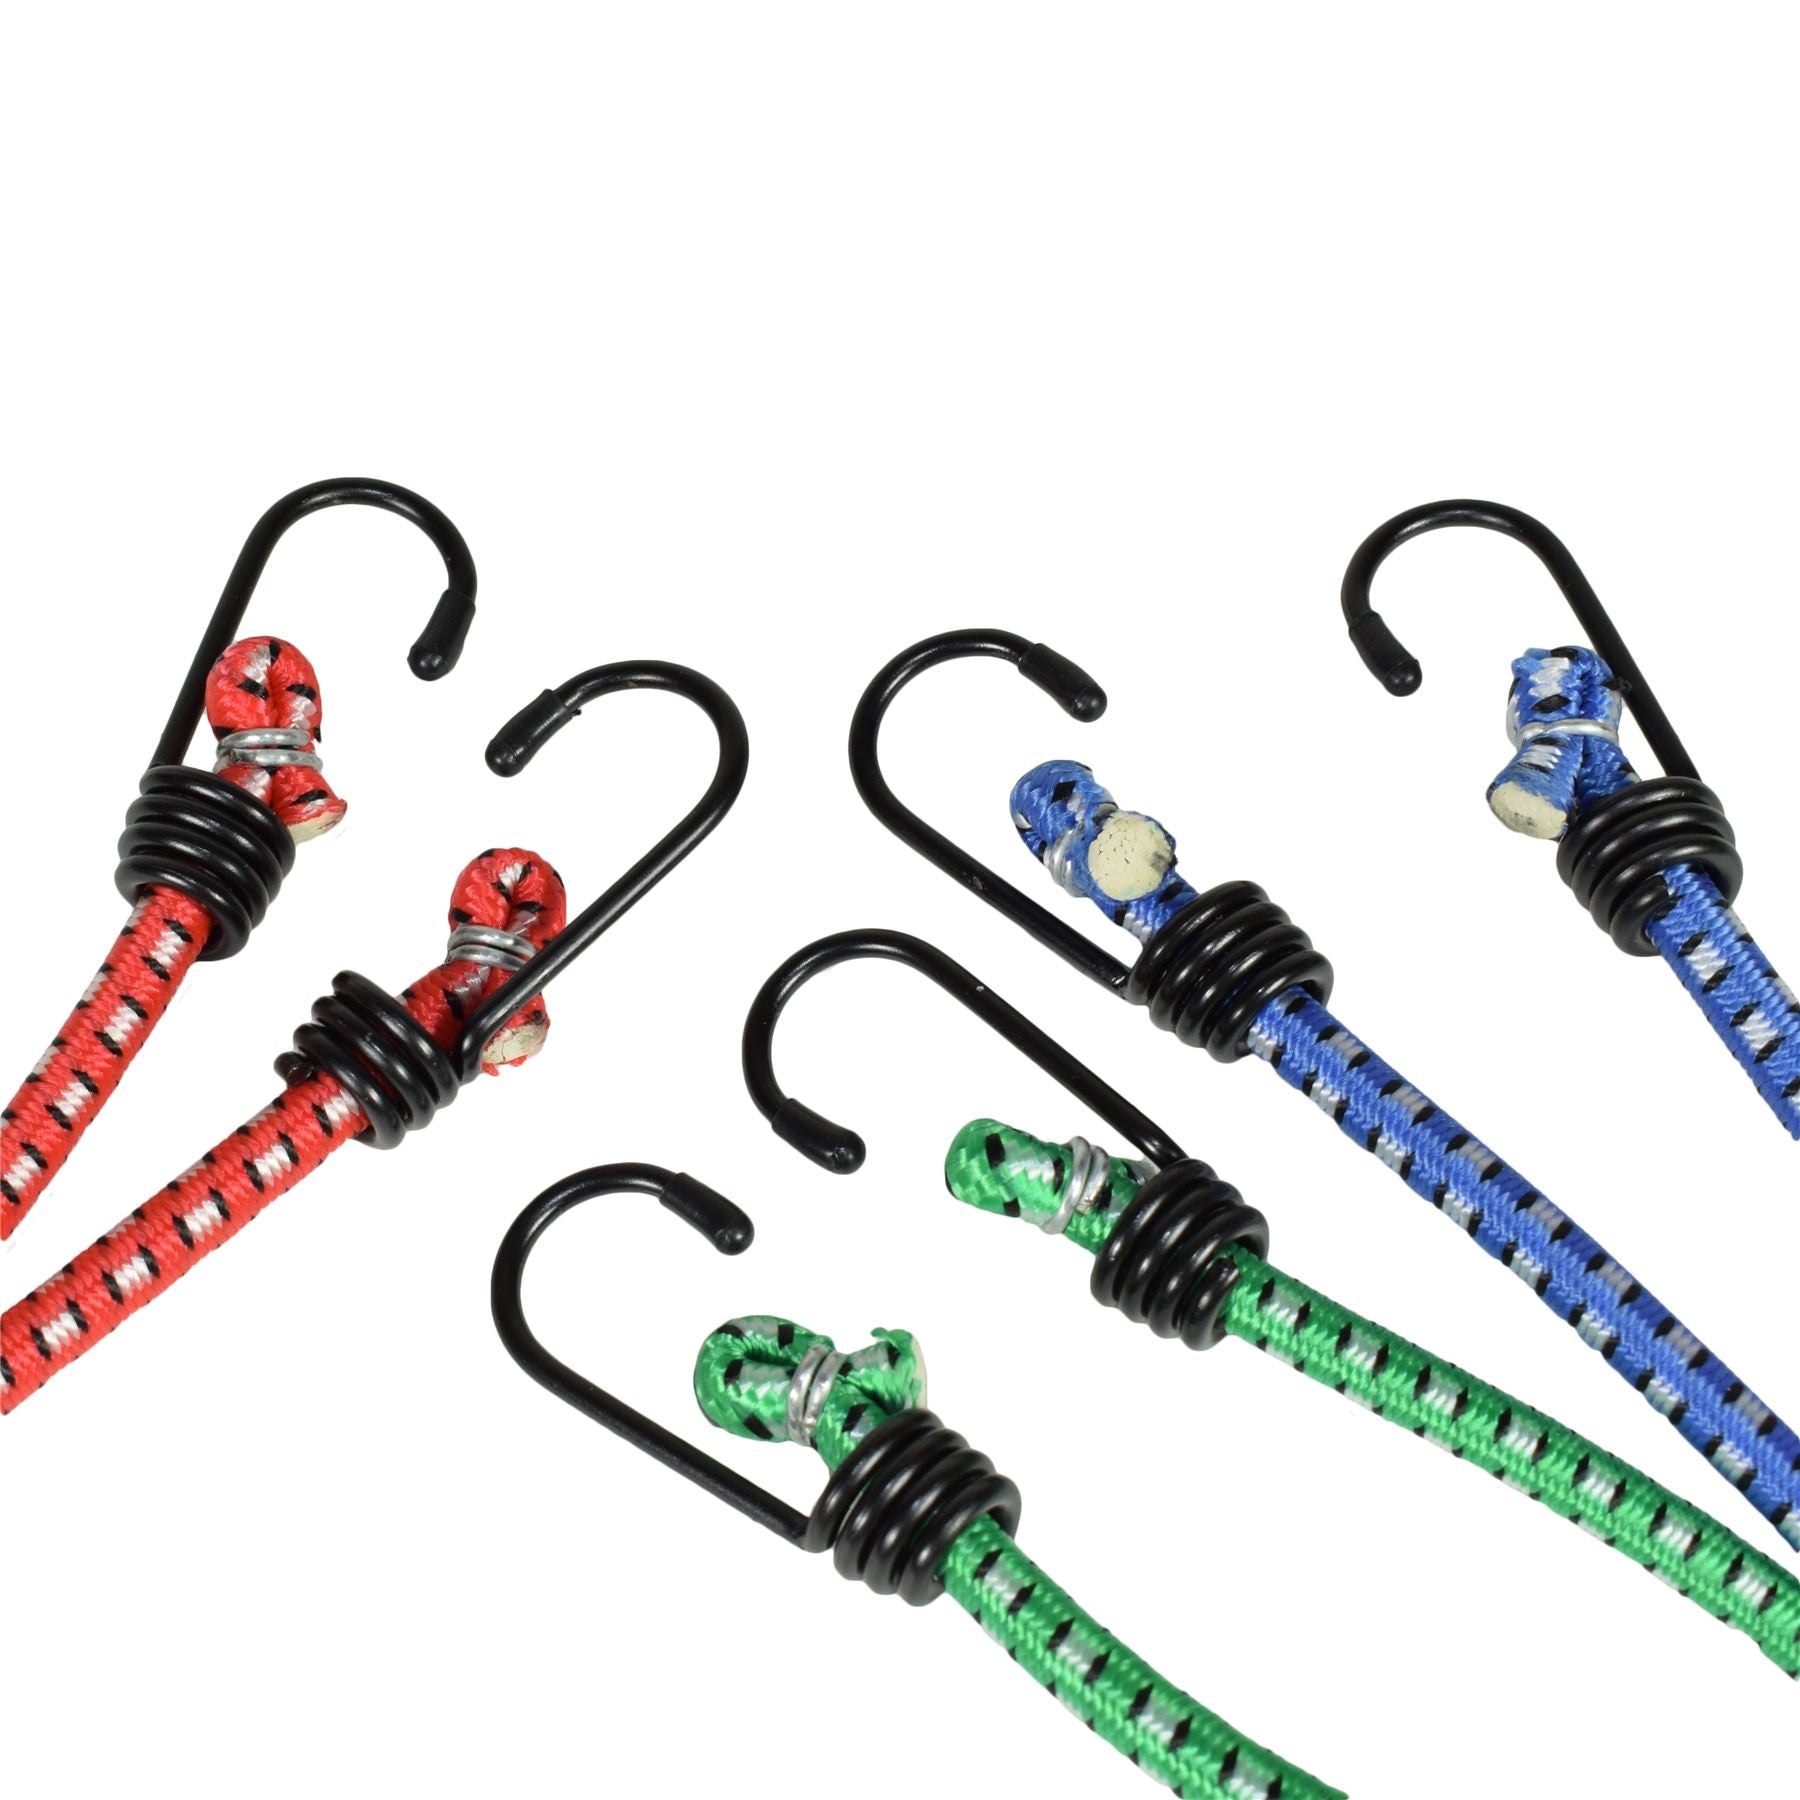 3pc 40" x 8mm Bungee Bungees Rope Straps Tie Downs Storage Holder Fasteners